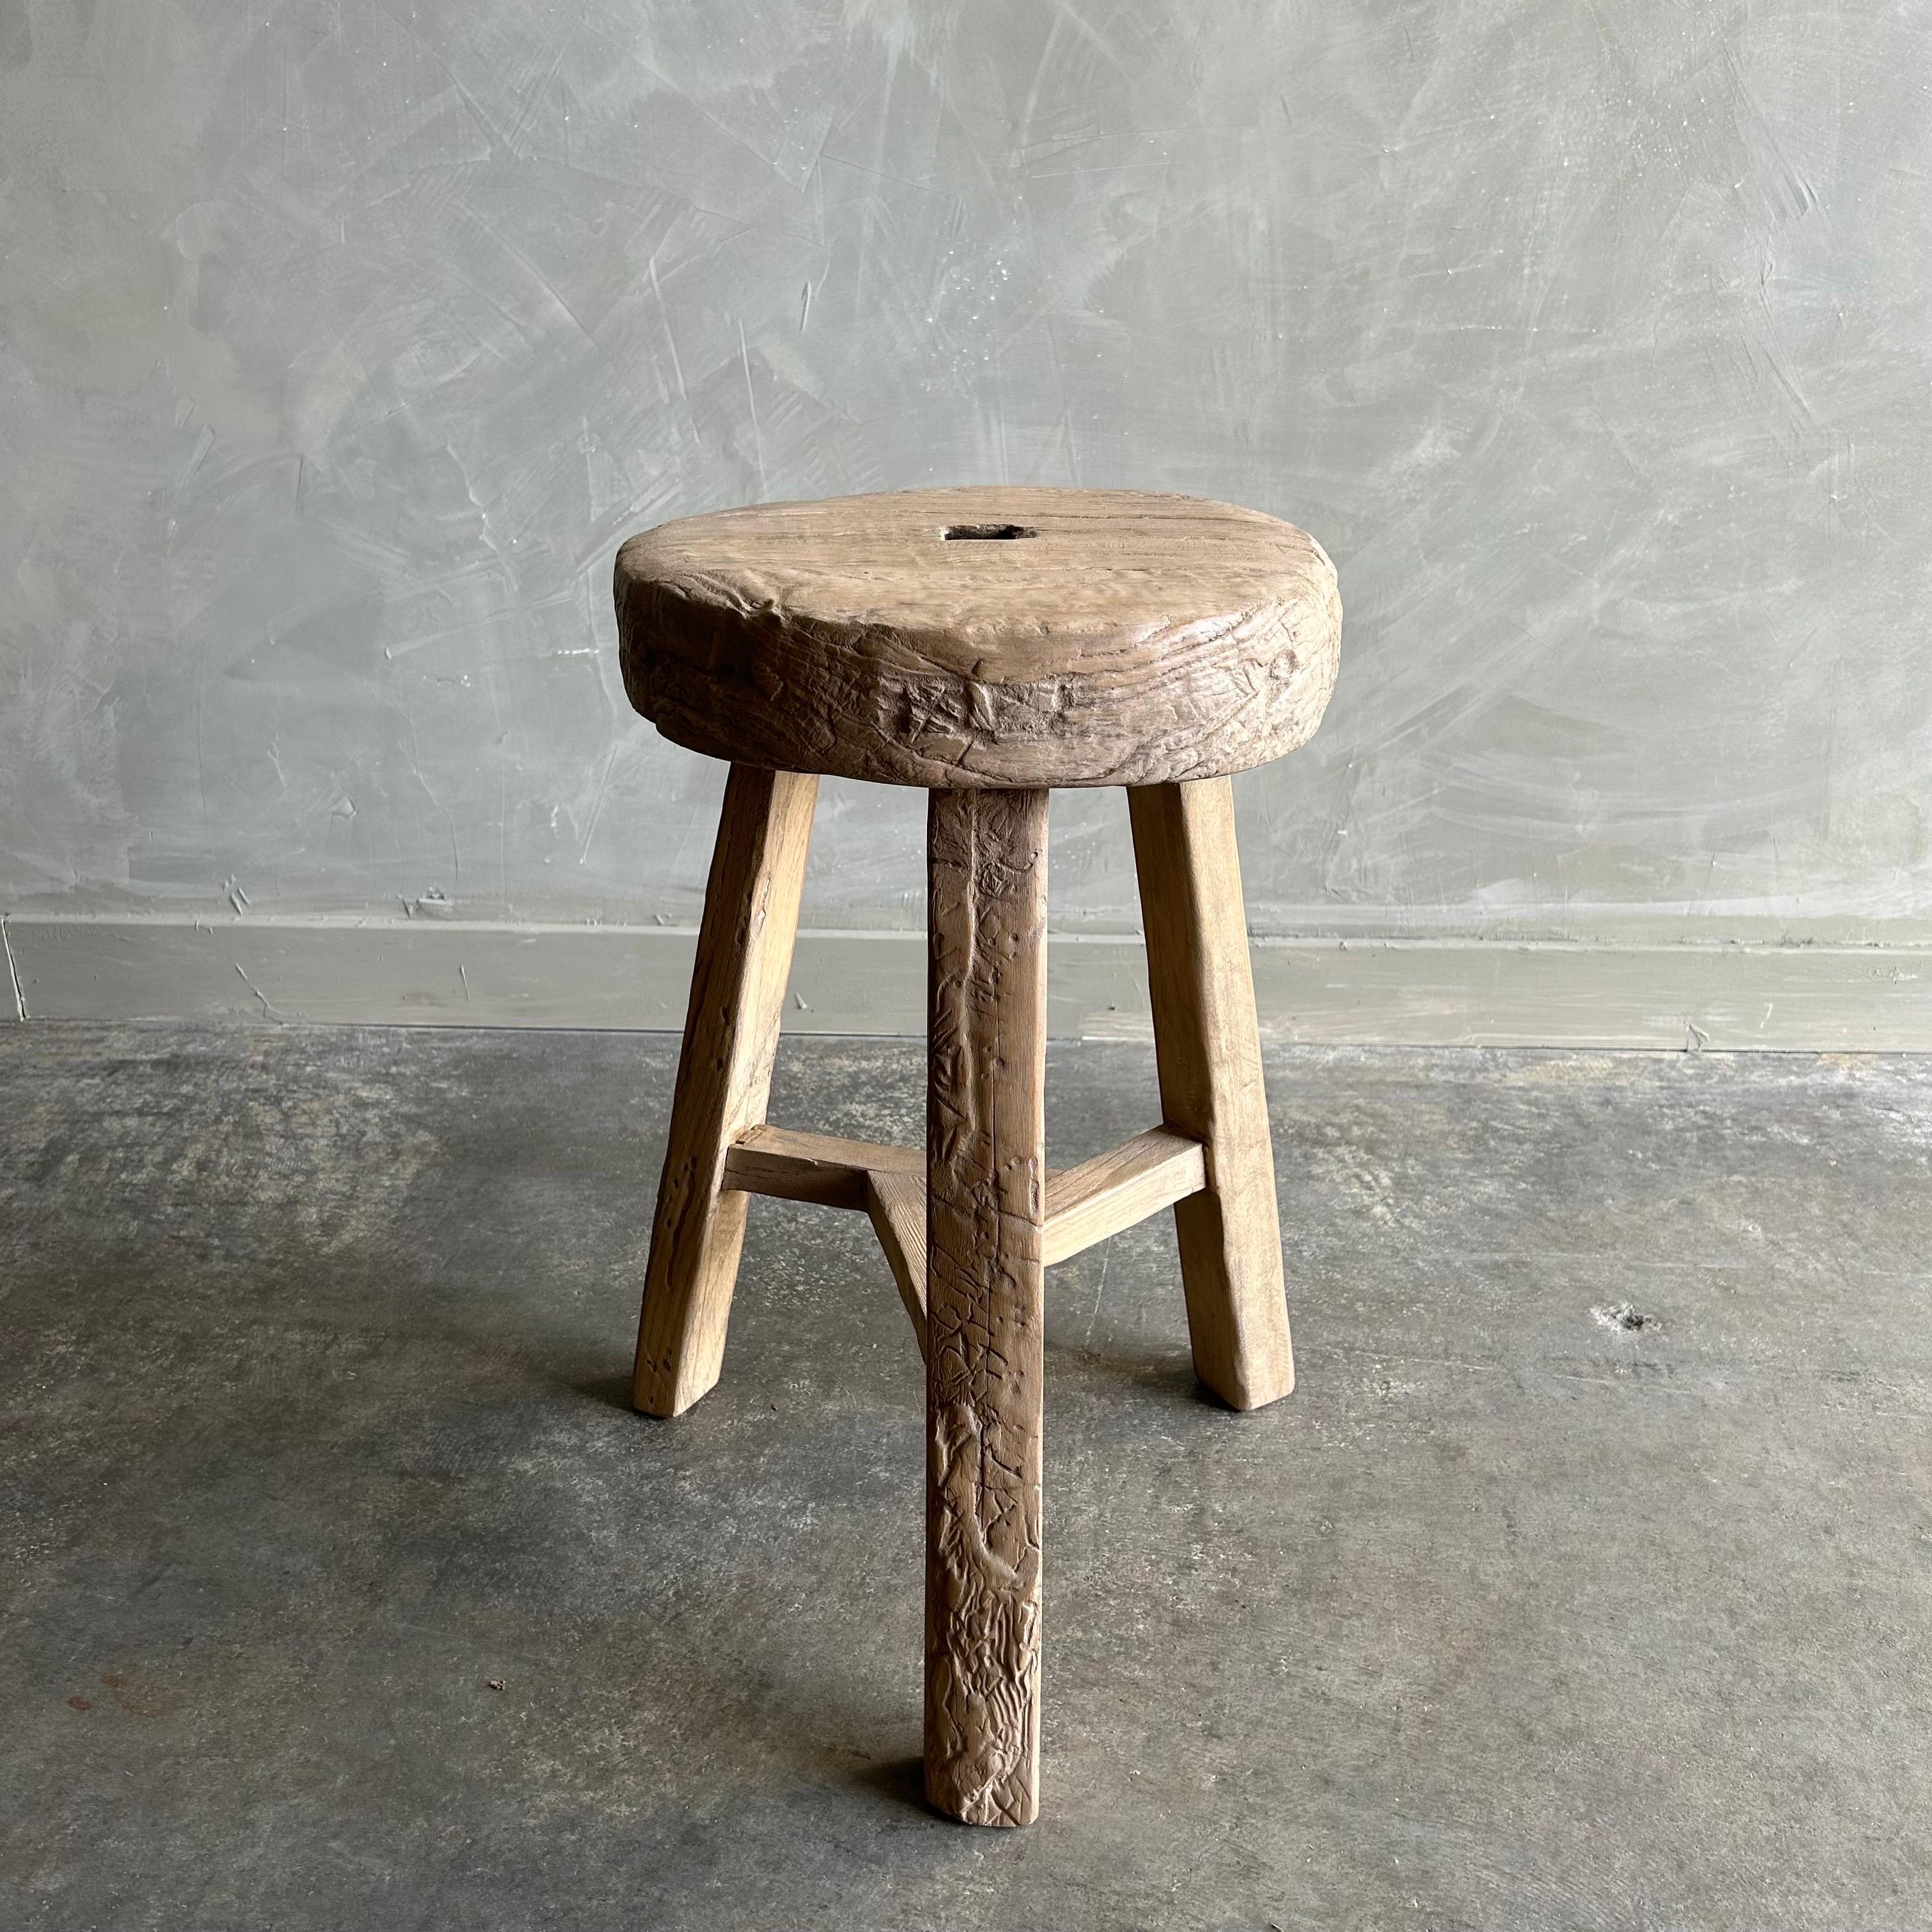 Vintage Elm Wood Wheel Stool or Side Table In New Condition For Sale In Brea, CA